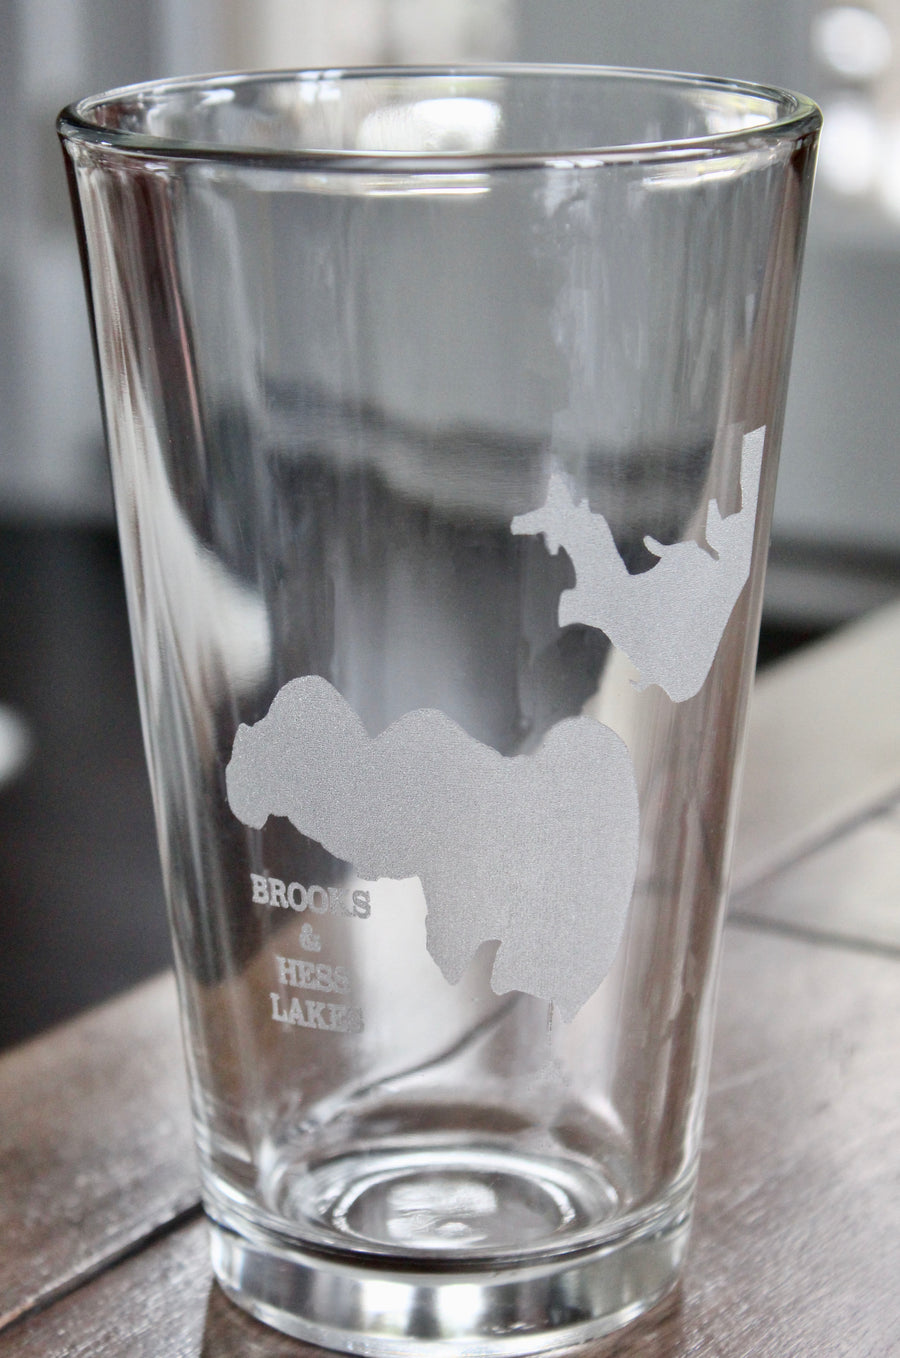 Brooks and Hess Lakes, MI Map Engraved Glasses